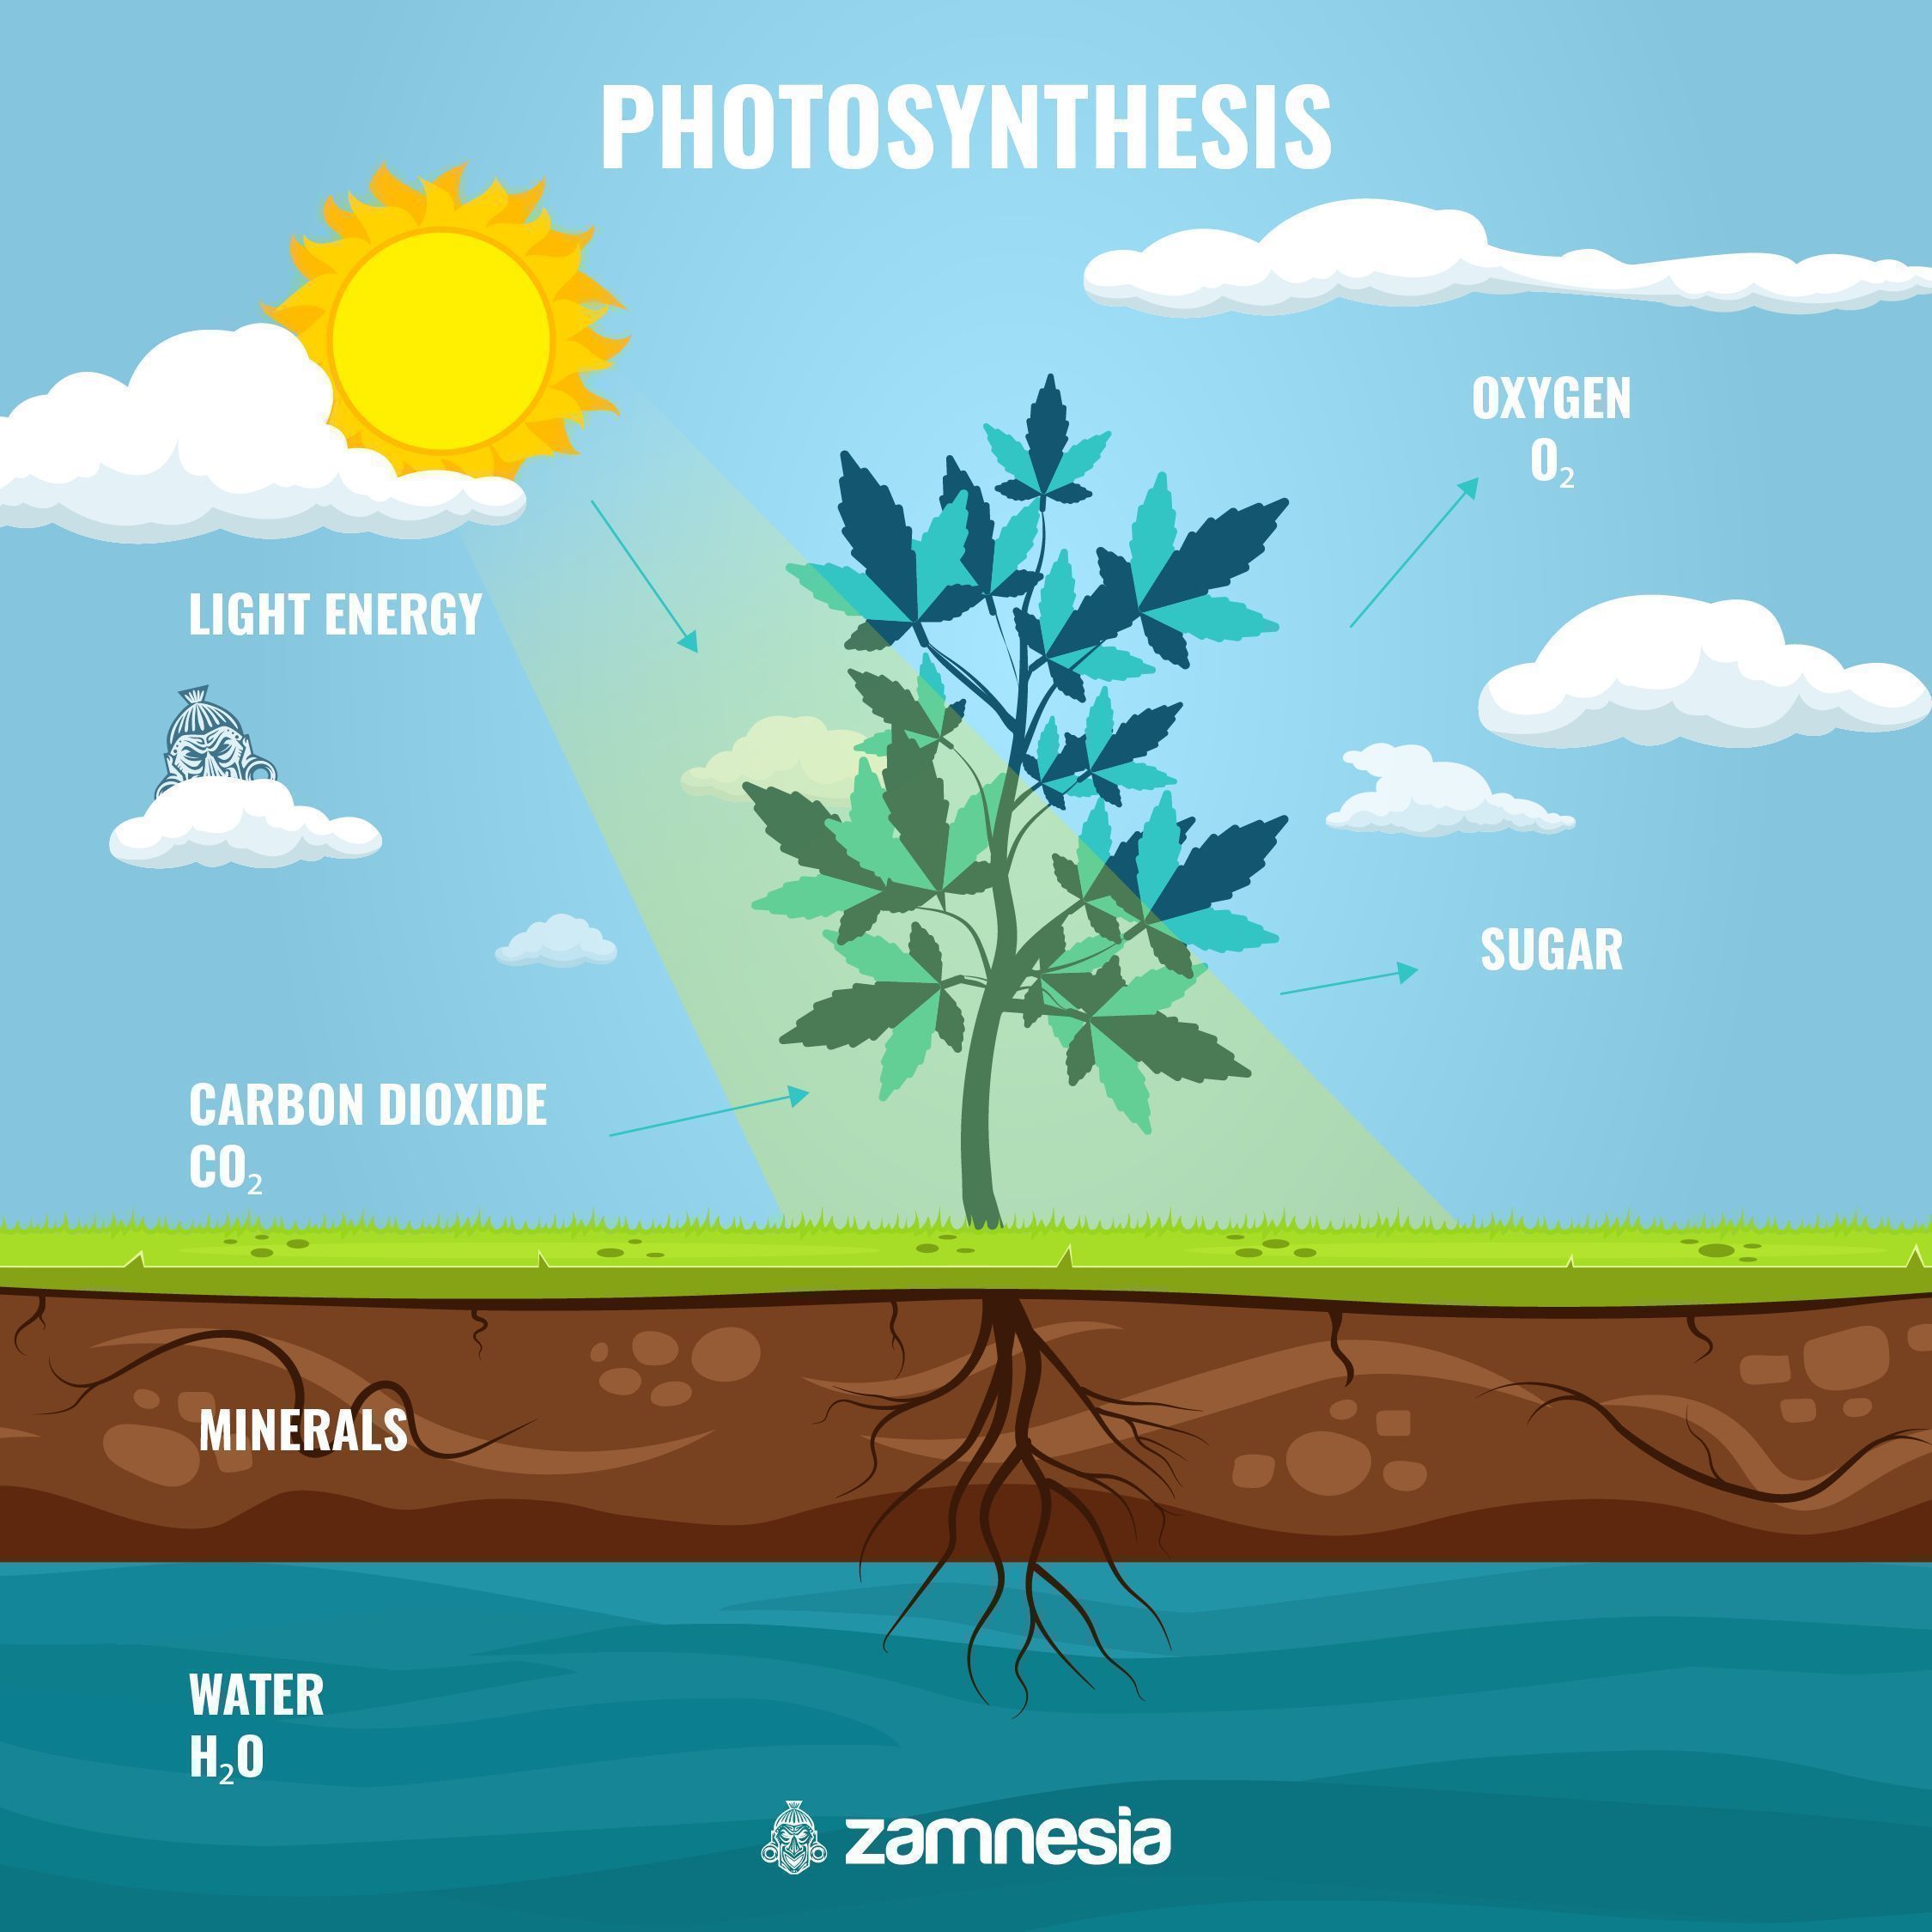 IMPORTANCE OF PHOTOSYNTHESIS FOR SUGARS IN CANNABIS